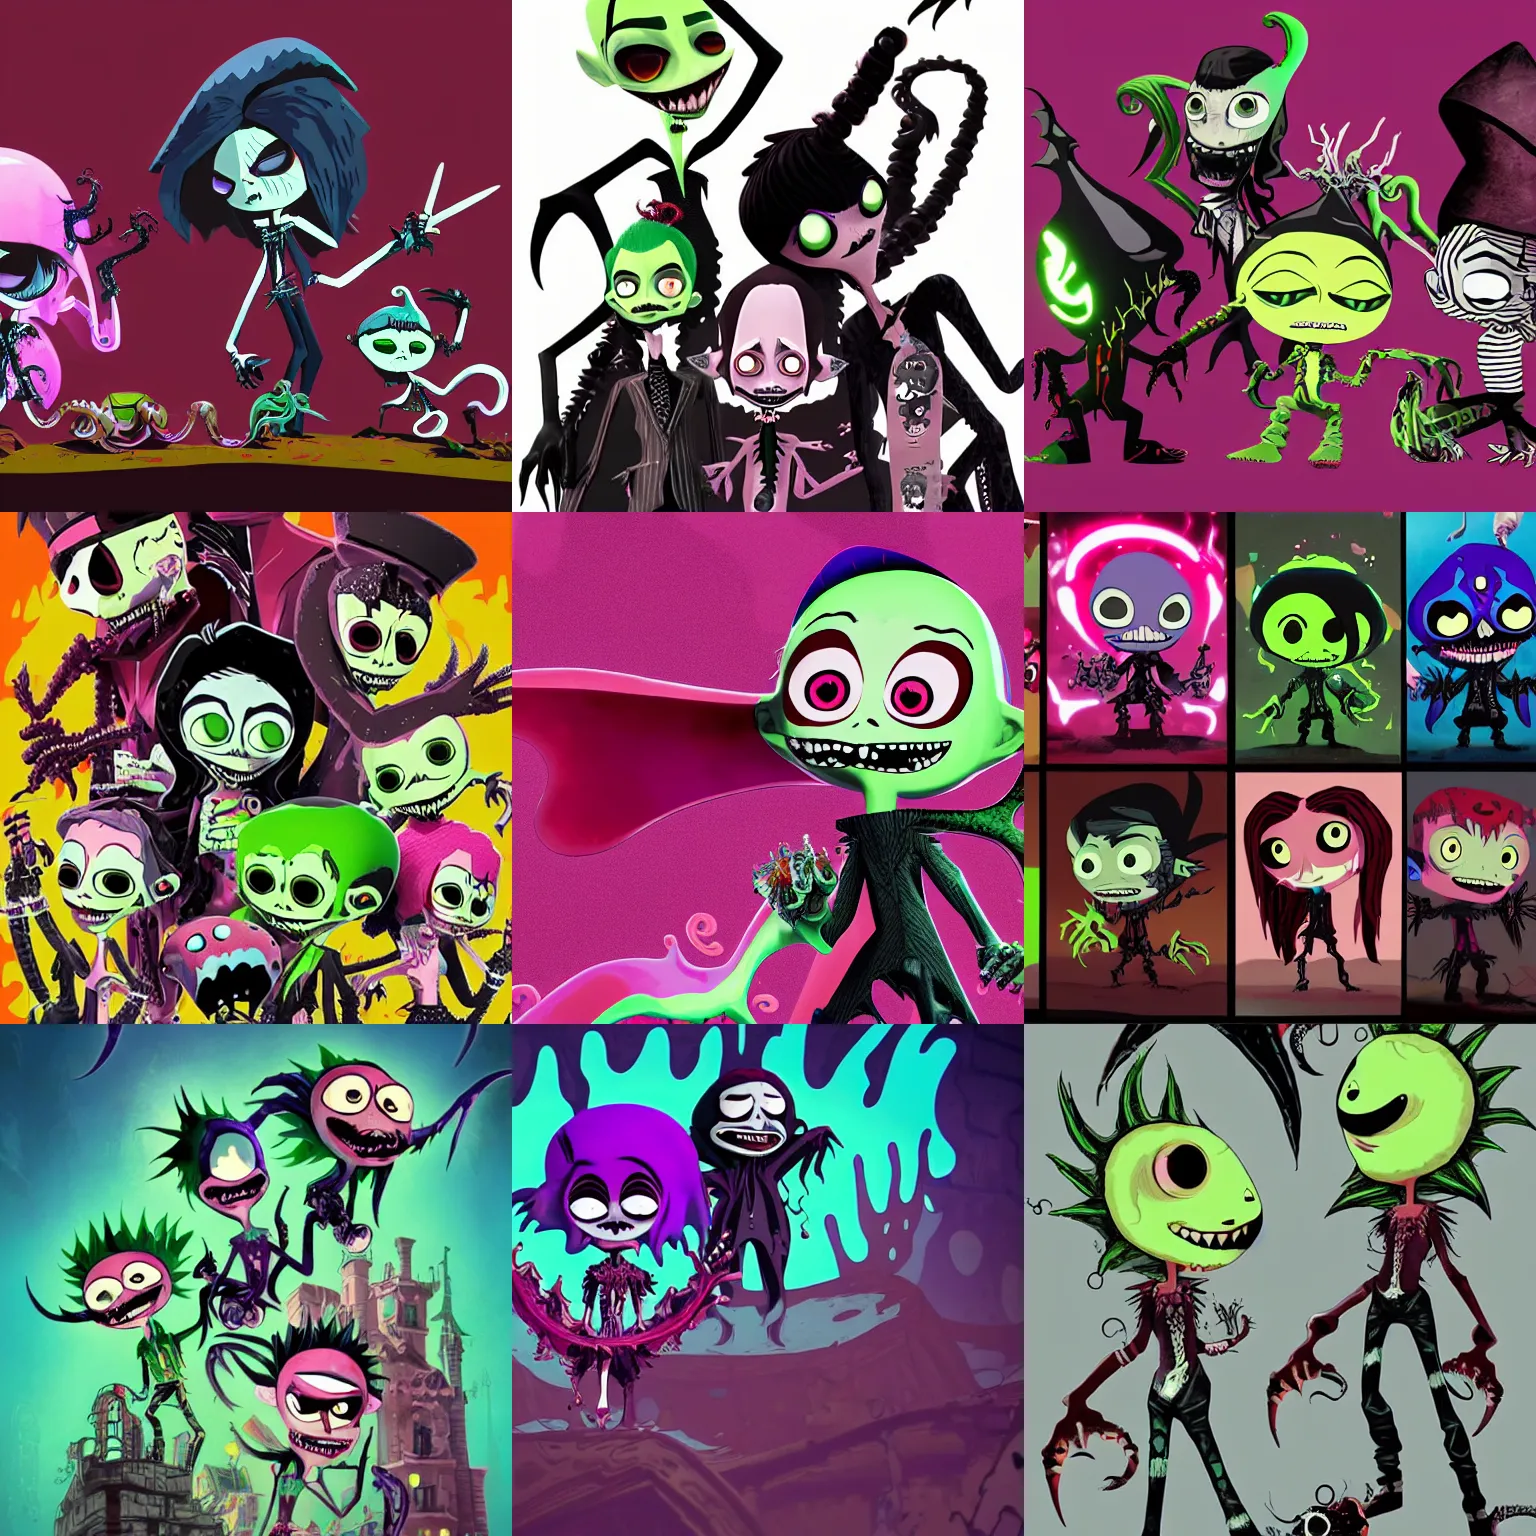 Prompt: CGI tim burton gothic punk vampiric electrifying vampiric squid character designs of varying shapes and sizes by genndy tartakovsky and the creators of fret nice being overseen by Jamie Hewlett from gorillaz for a splatoon game by nintendo